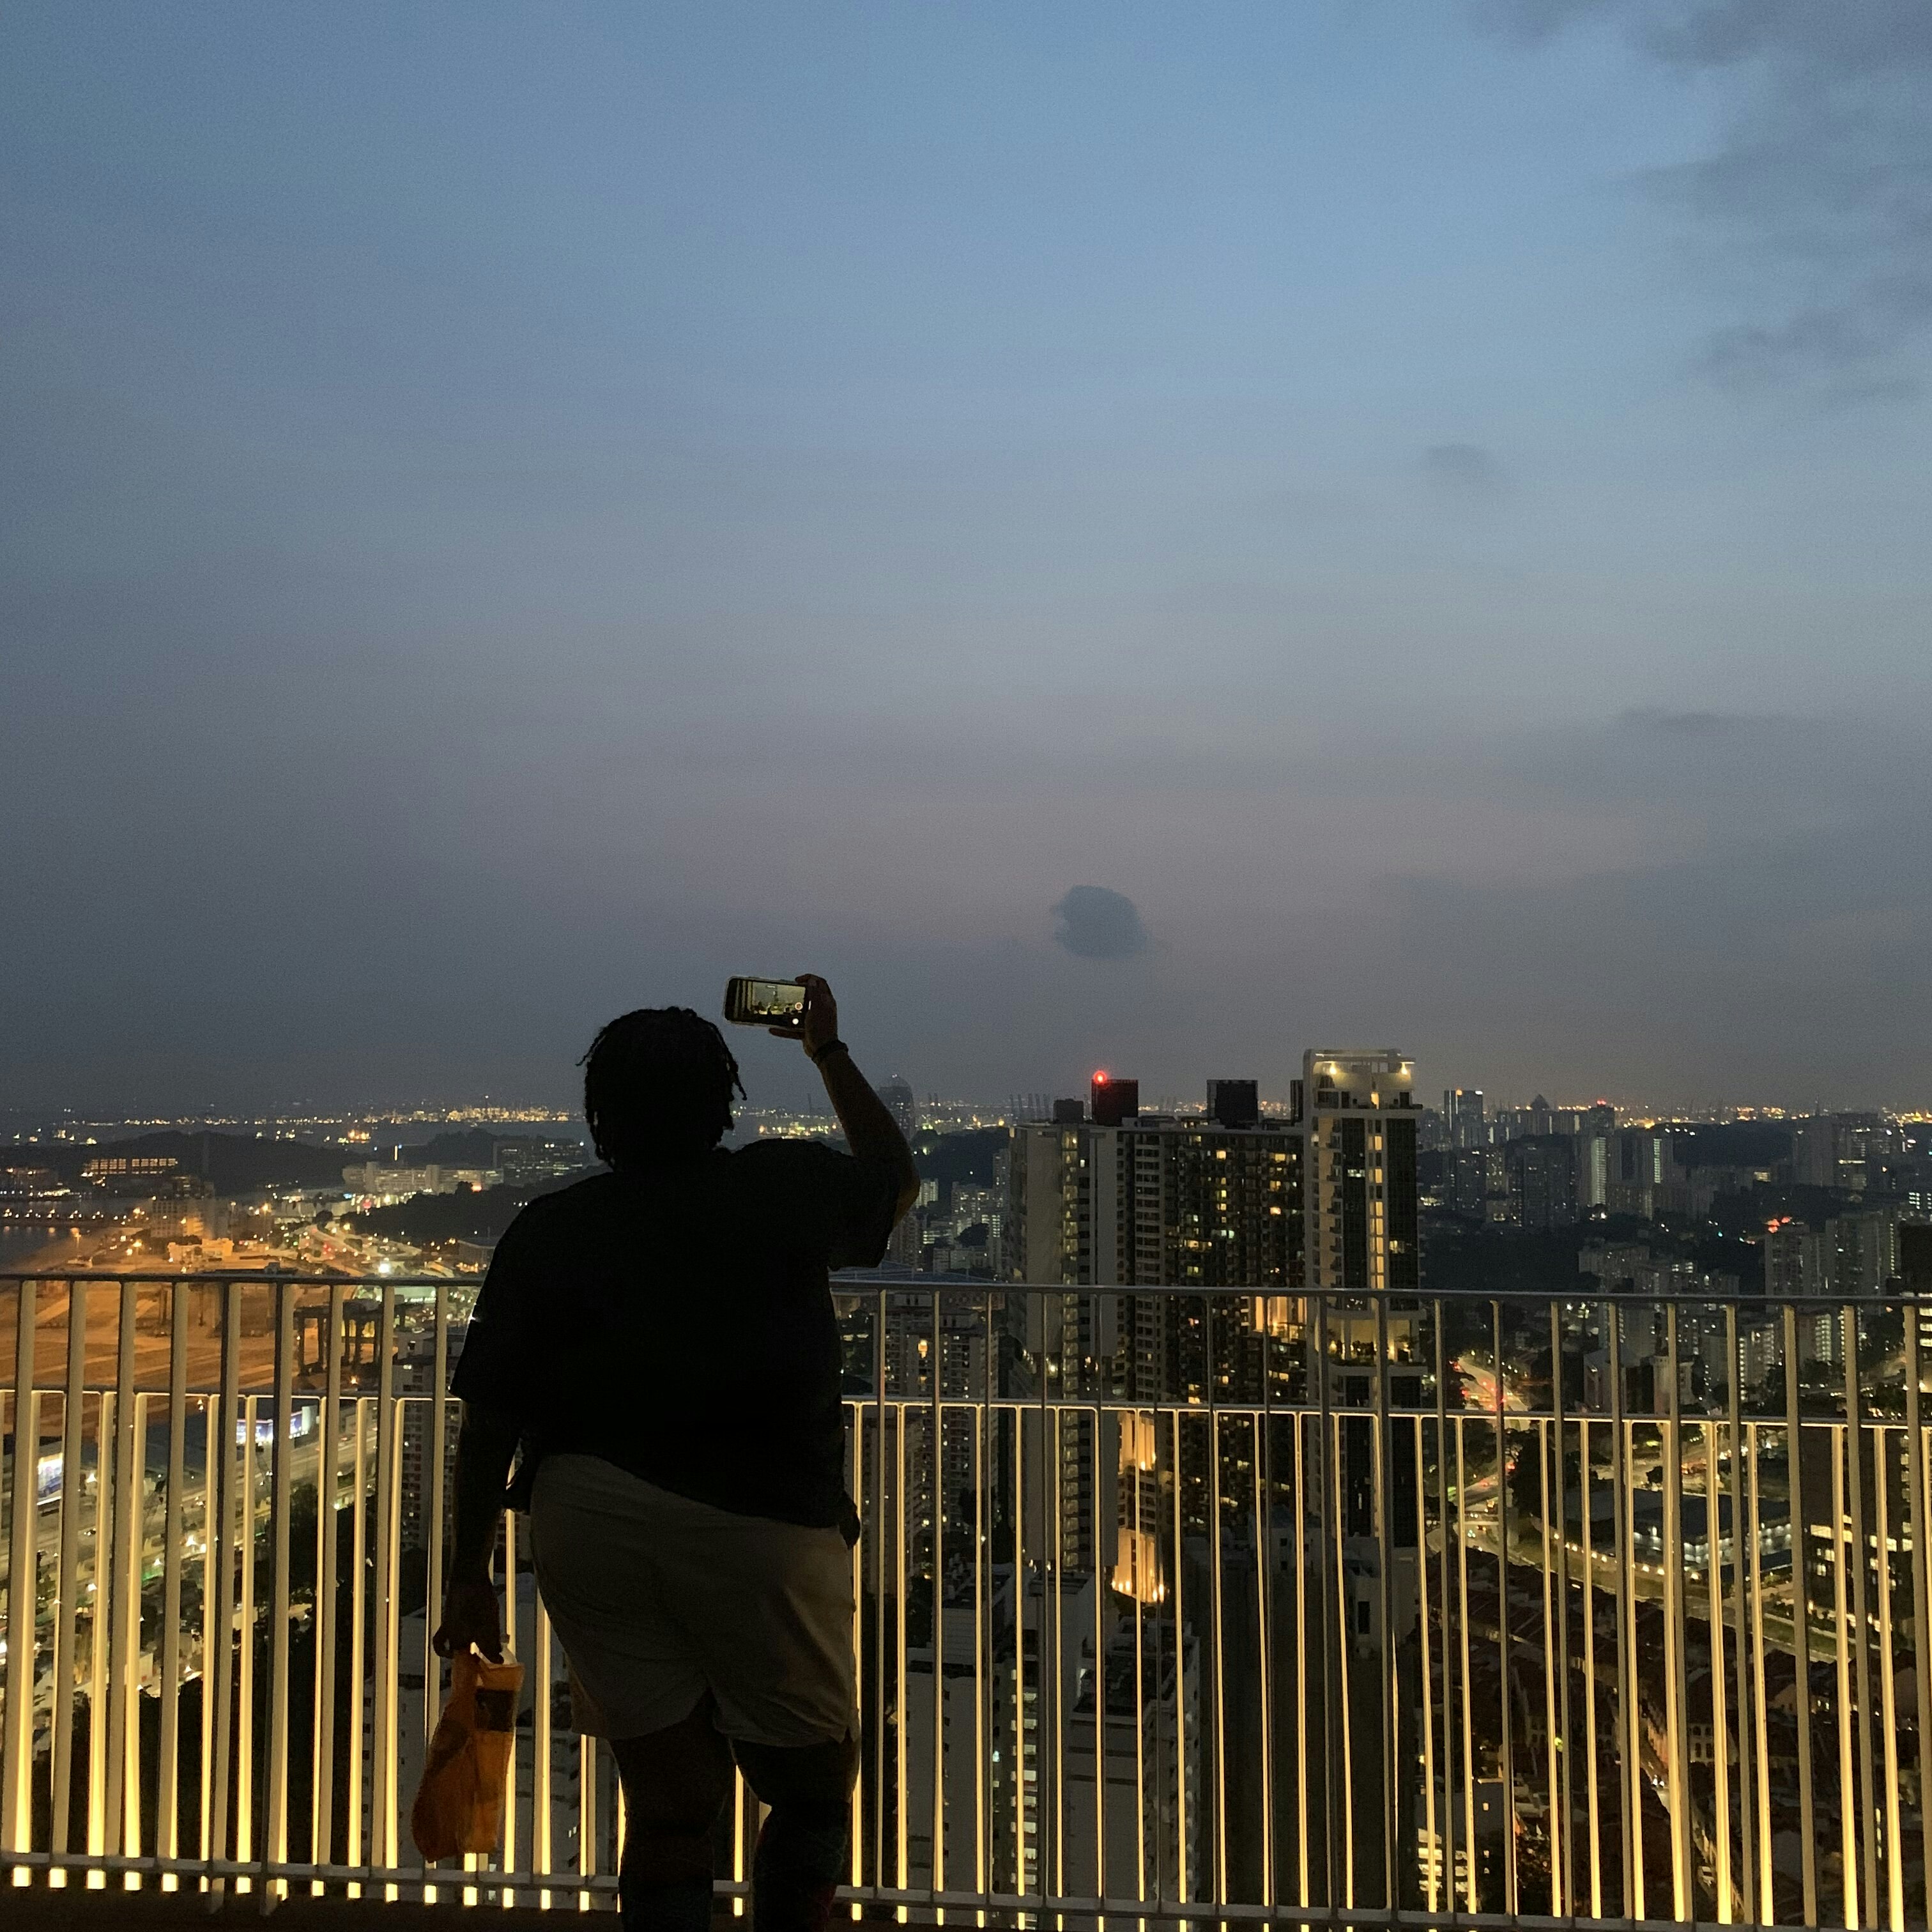 A woman takes a photo of the Singapore skyline on the top of the Singapore building in the early evening